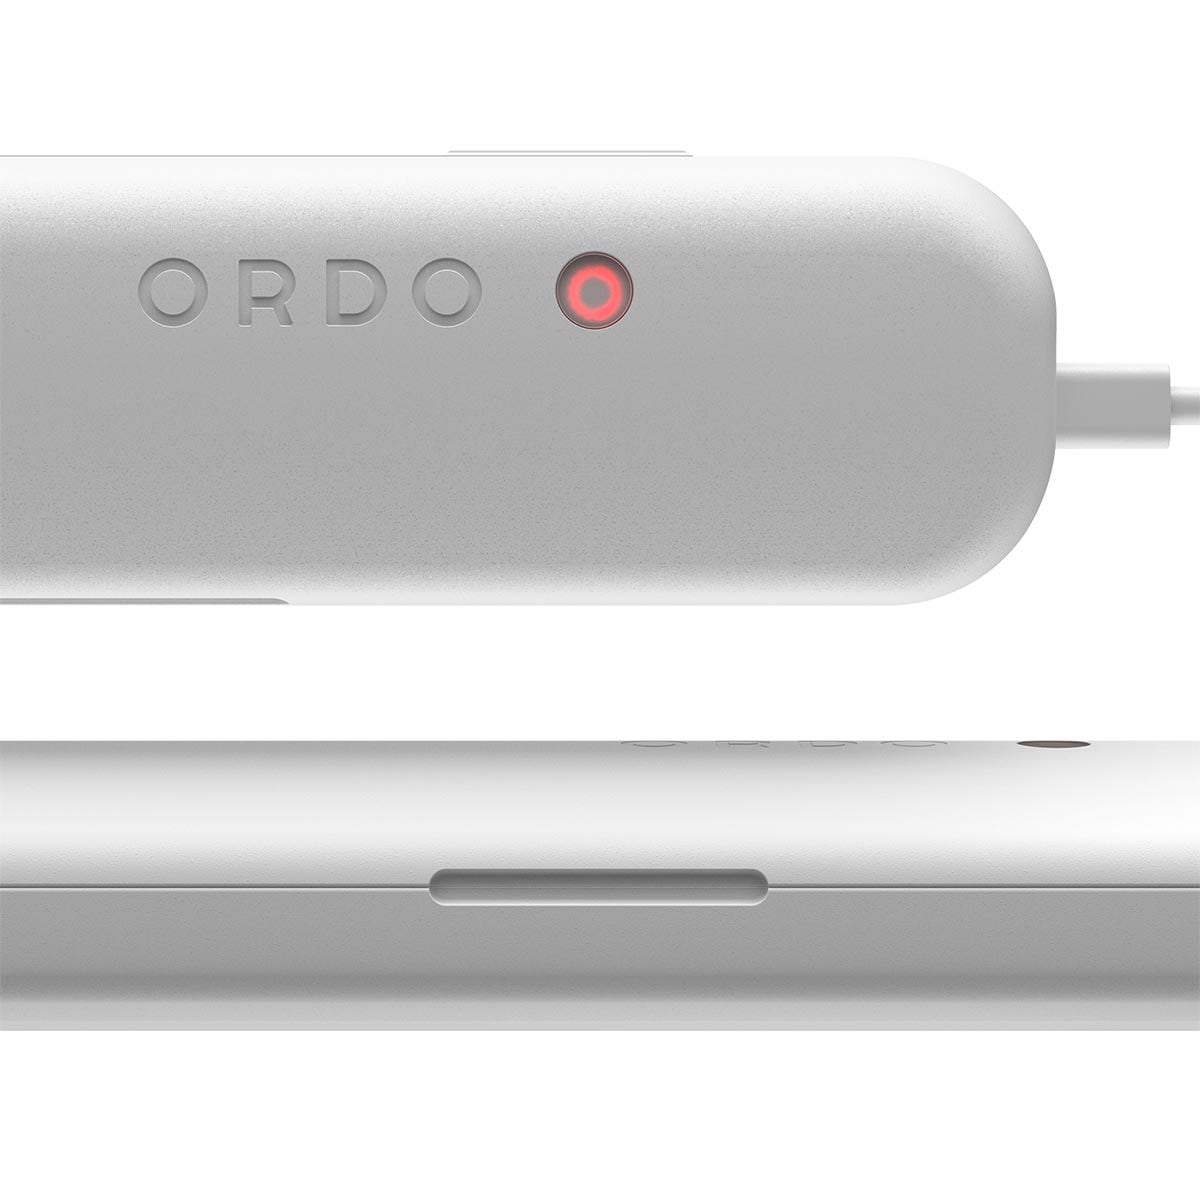 Ordo Sonic+ Electric Toothbrush & Charging Travel Case - White/Silver